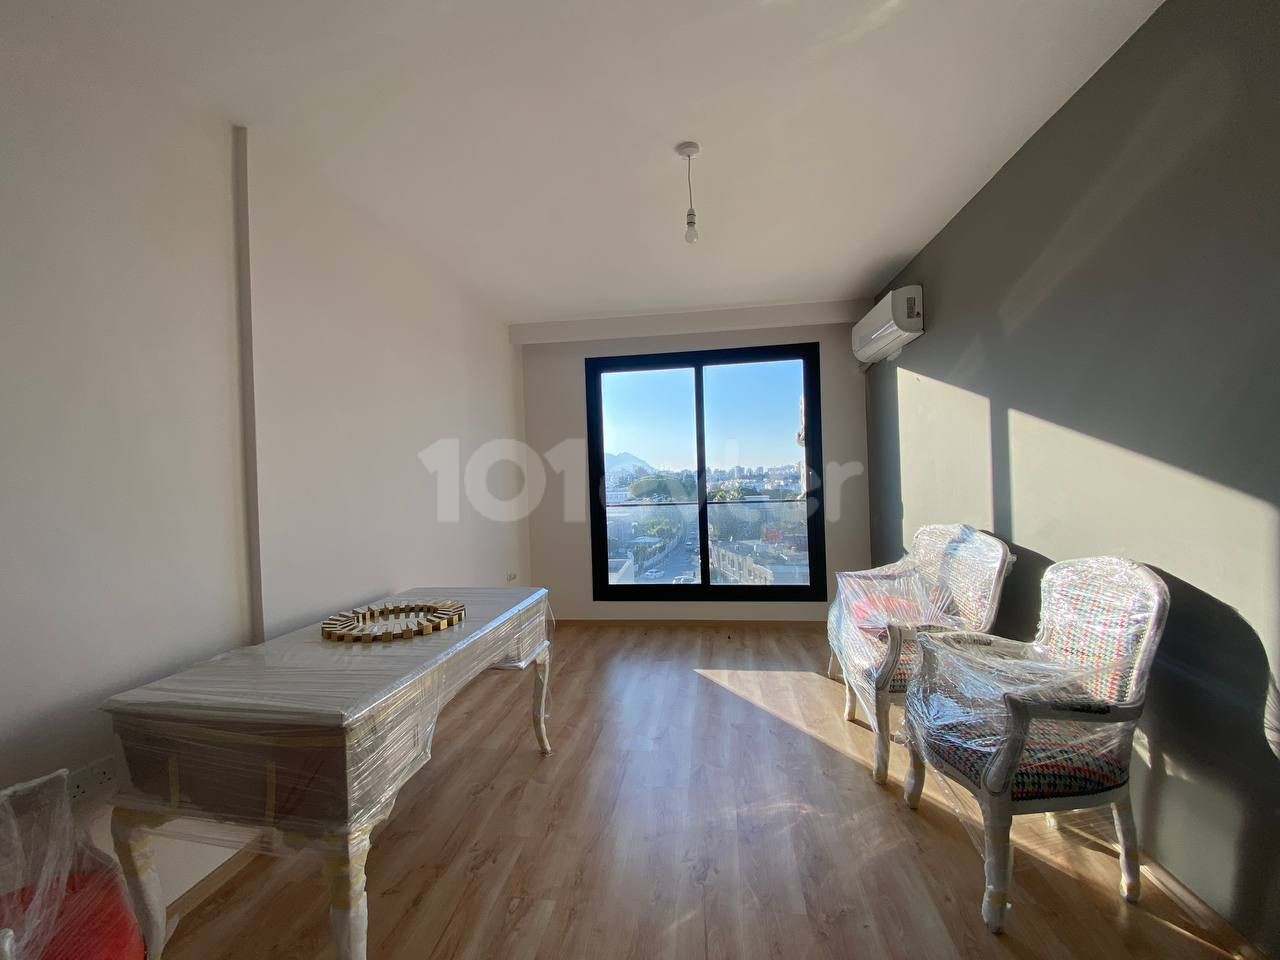 2 Bedroom Apartment in Kyrenia Center, within walking distance to the harbor and extremely central location around Colony Hotel ** 